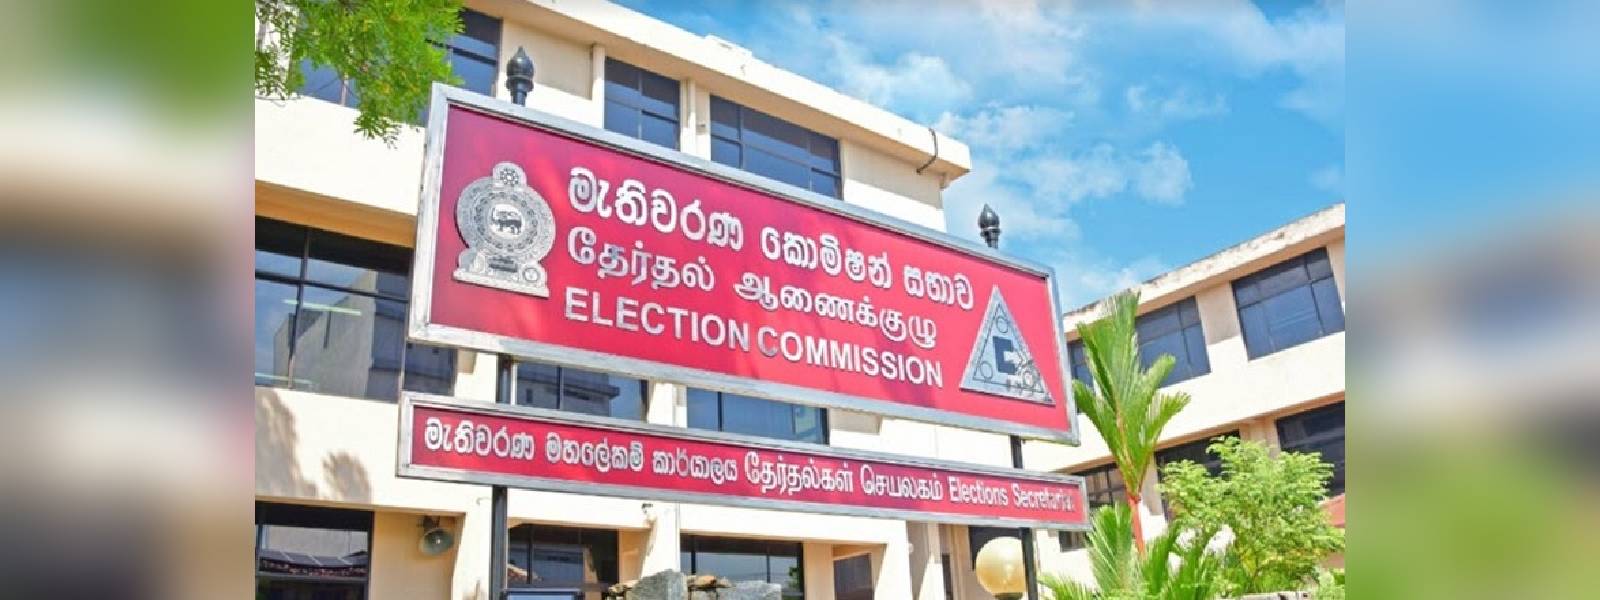 No more political parties based on racial & religious grounds: NEC